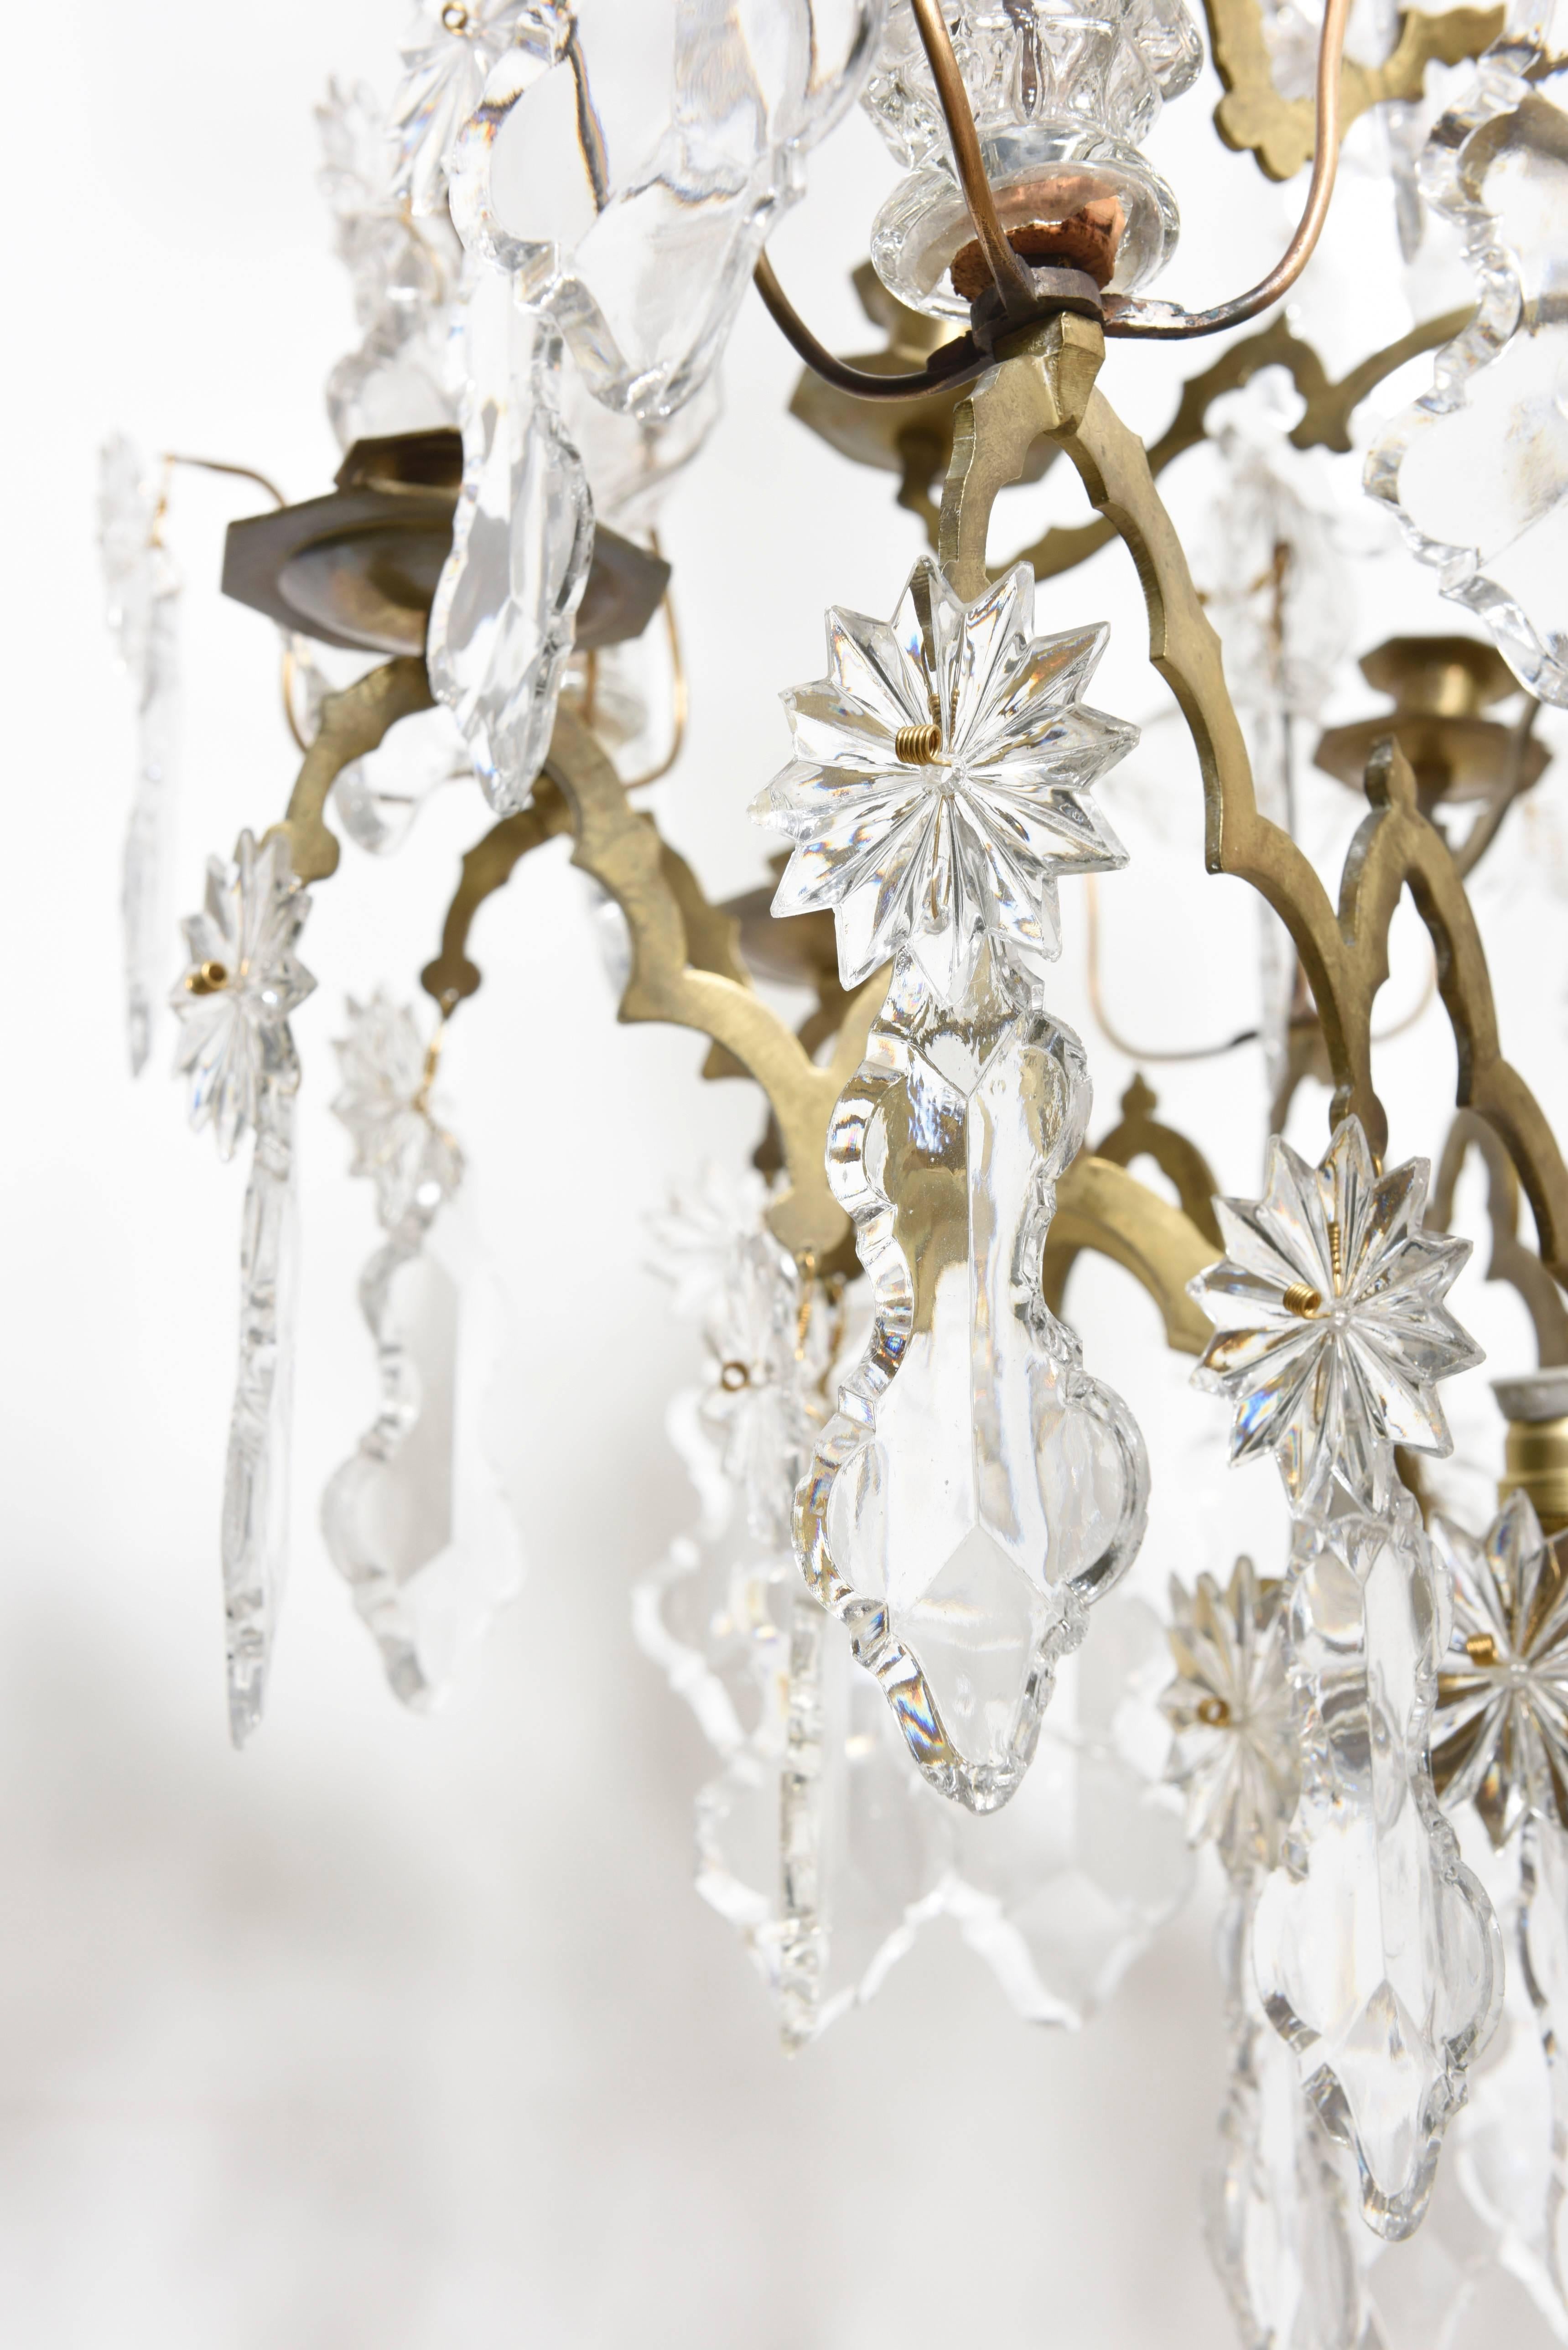 Large beautiful French Louis XV style doré bronze and crystal twelve-arm original, six candle chandelier with cut crystals, plaques, rosettes and faceted drops. Wonderful overall detailing and patina in the original finish.

The stunning and